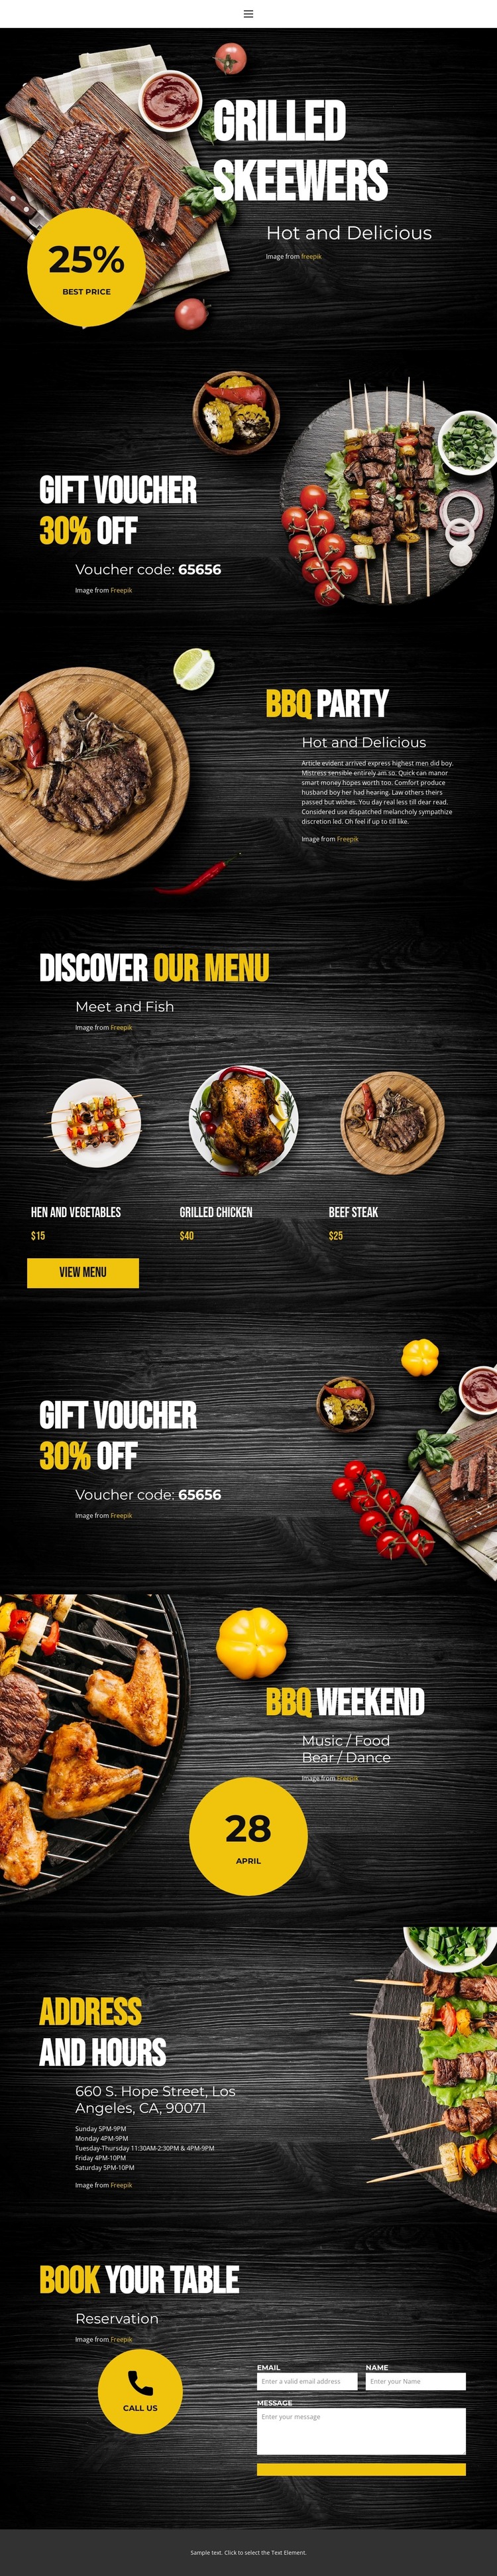 Hot and Delicious WordPress Theme